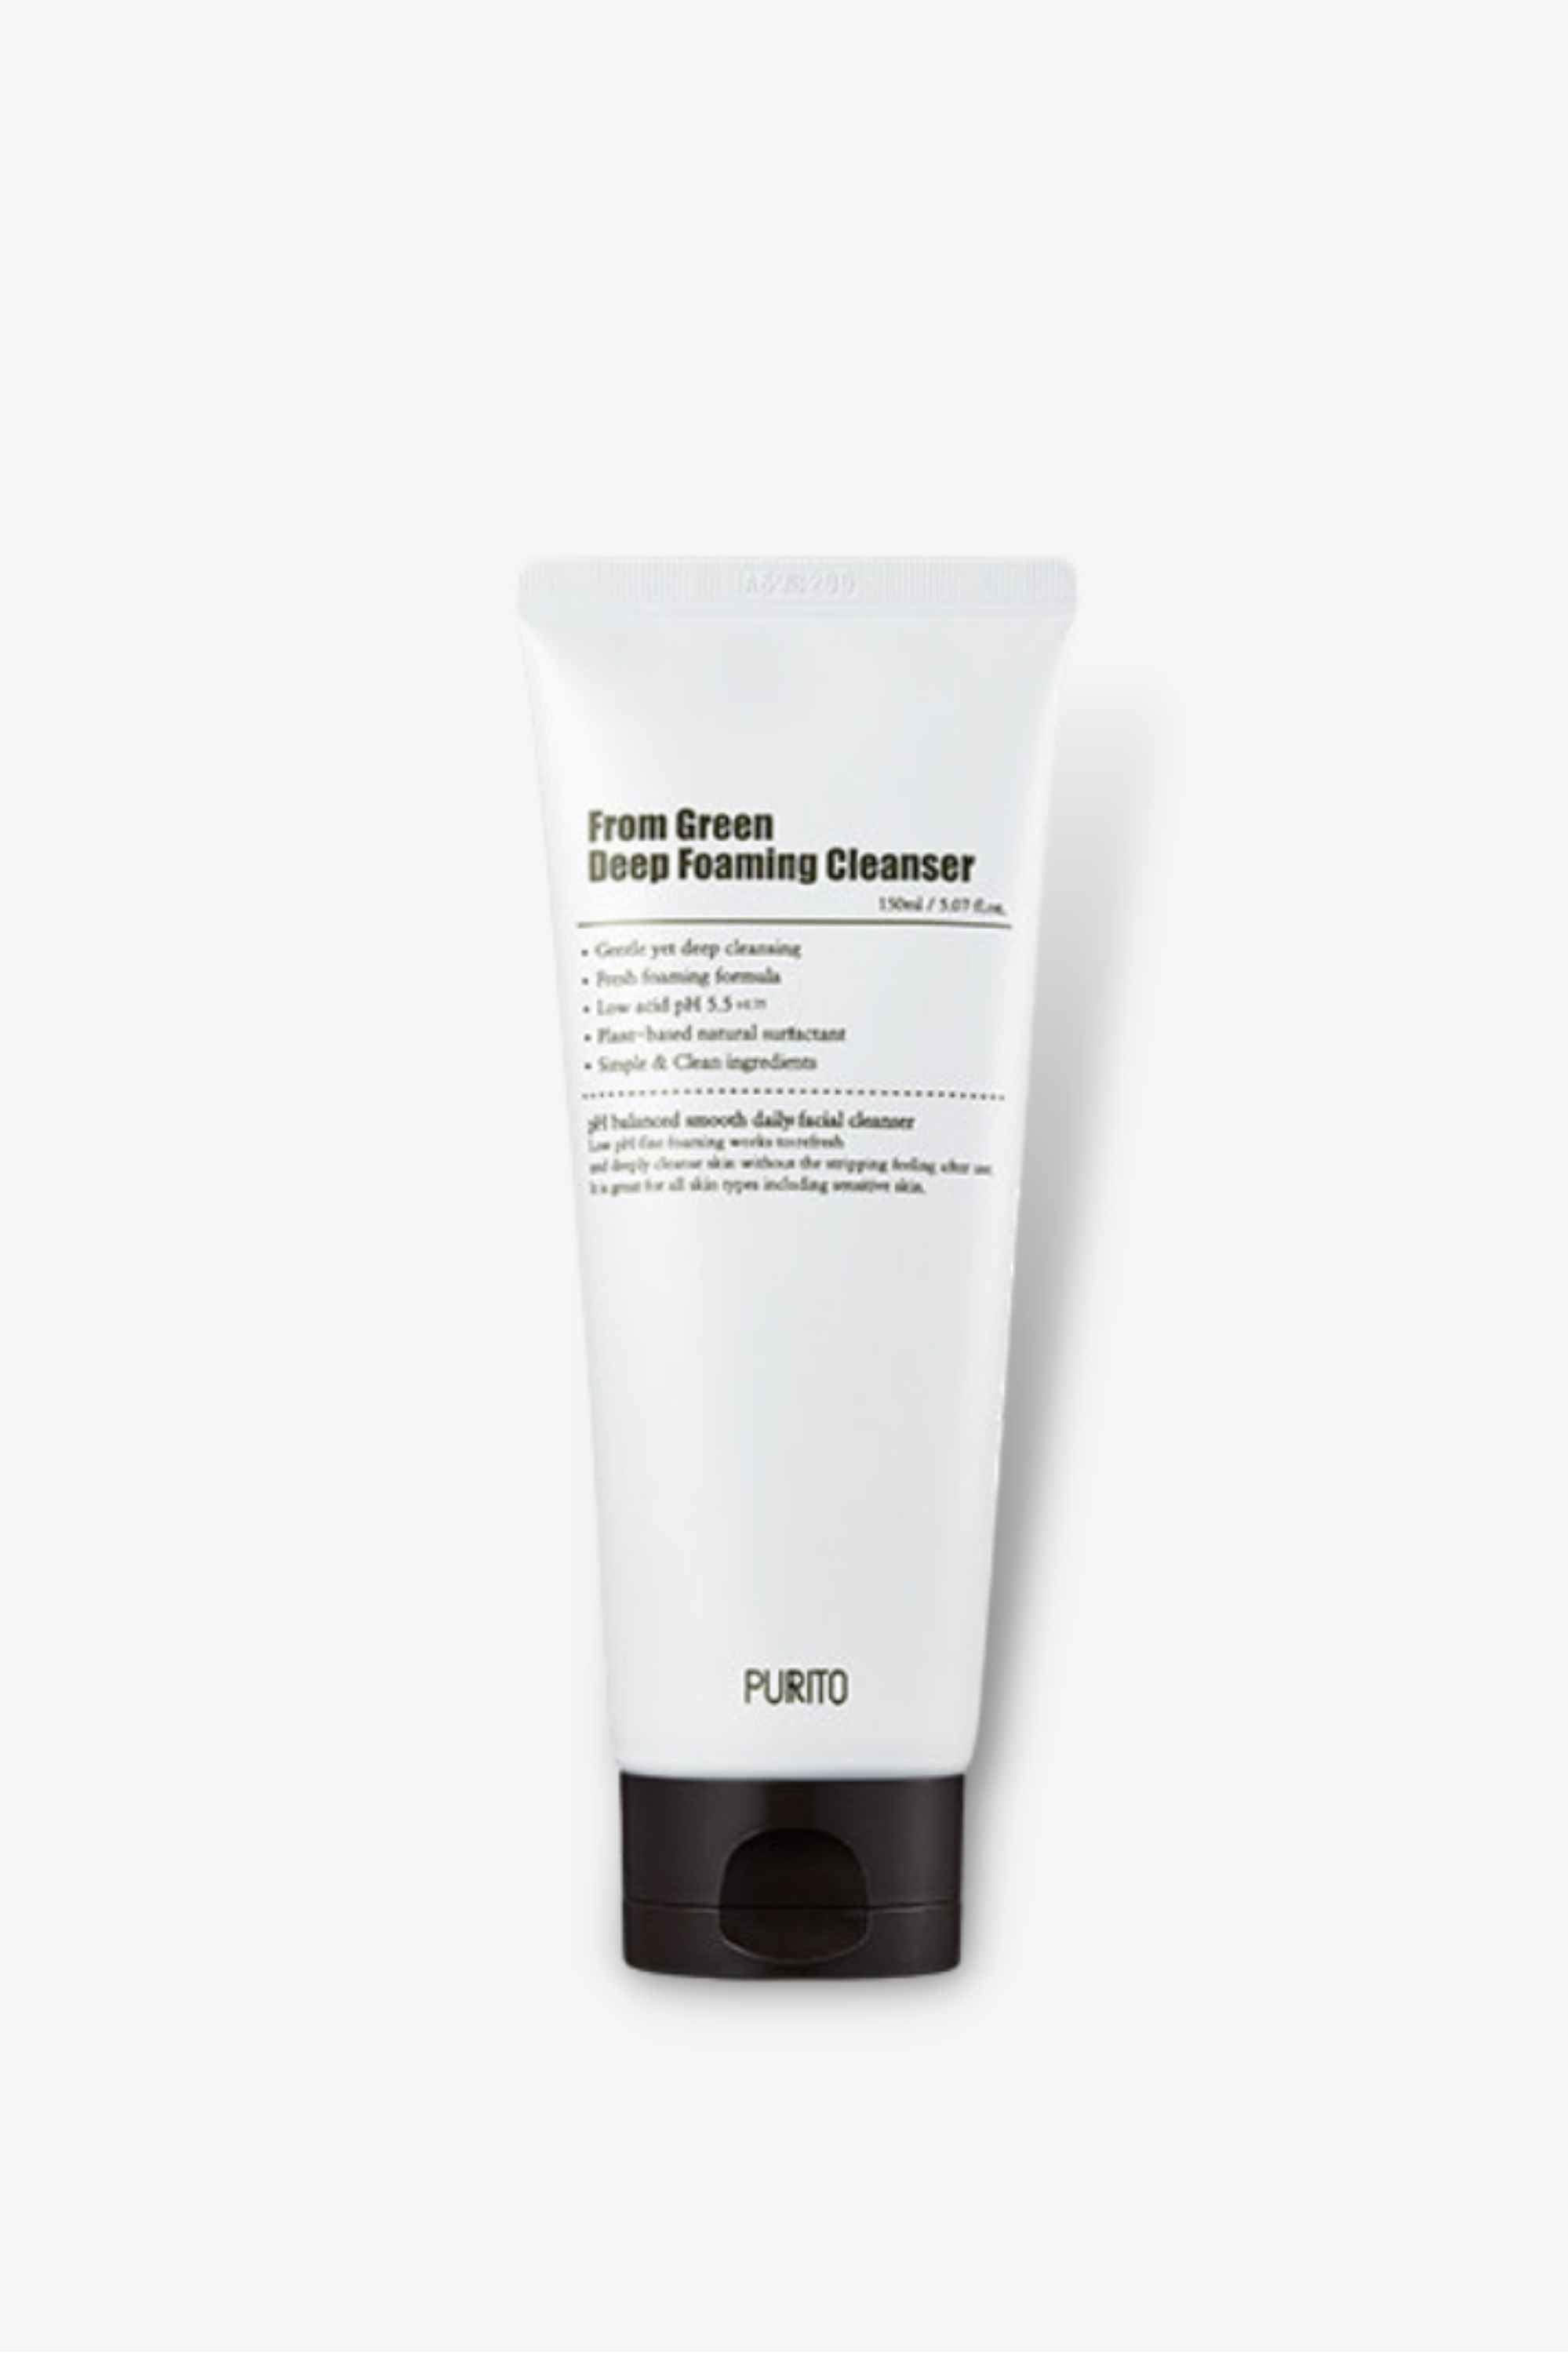 PURITO - From Green Deep Foaming Cleanser - 150ml